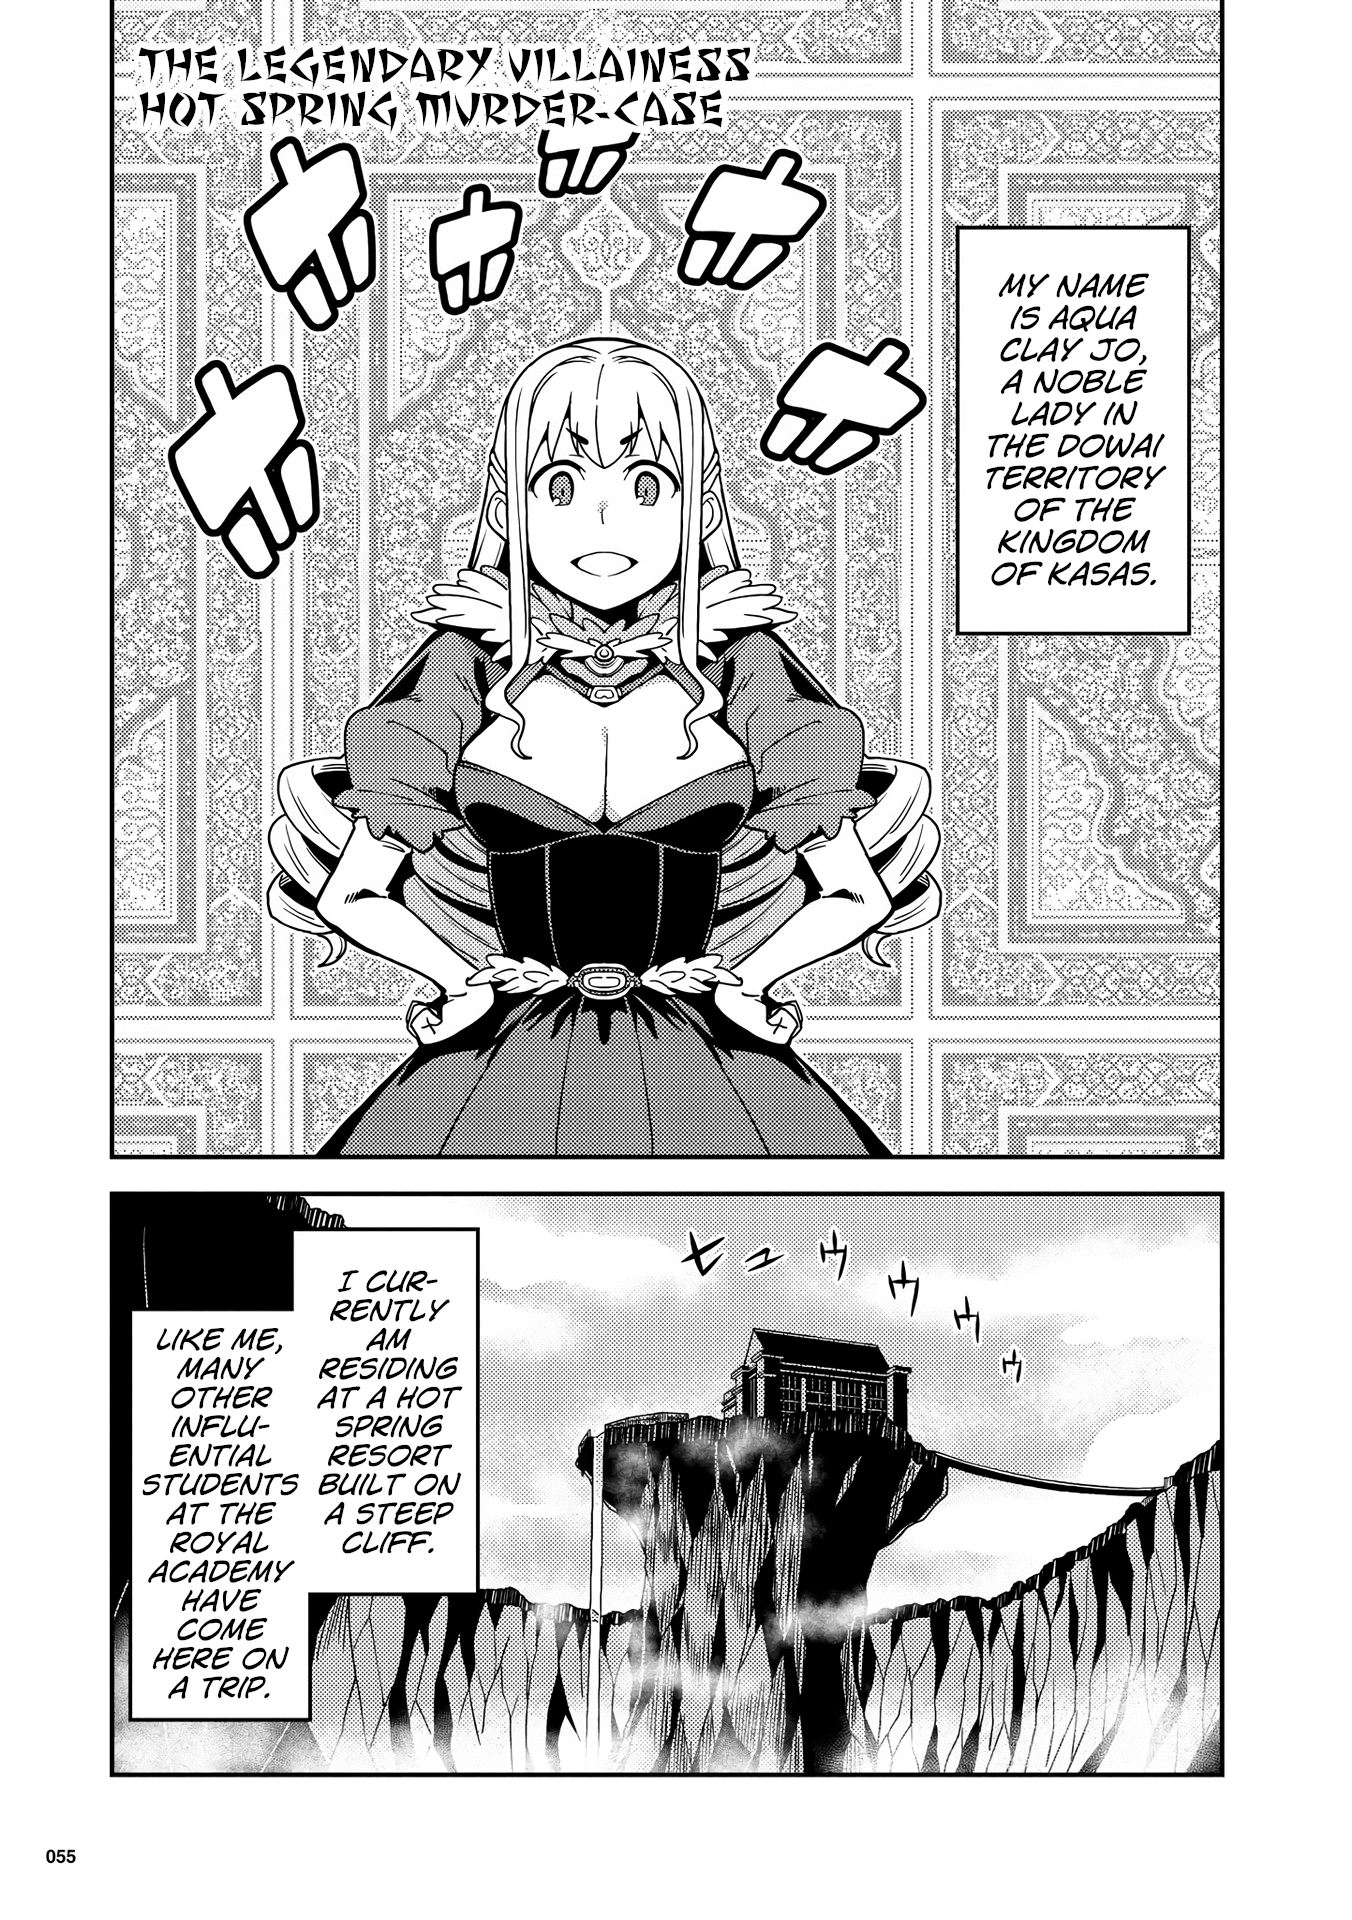 Girls From Different Worlds - Page 1